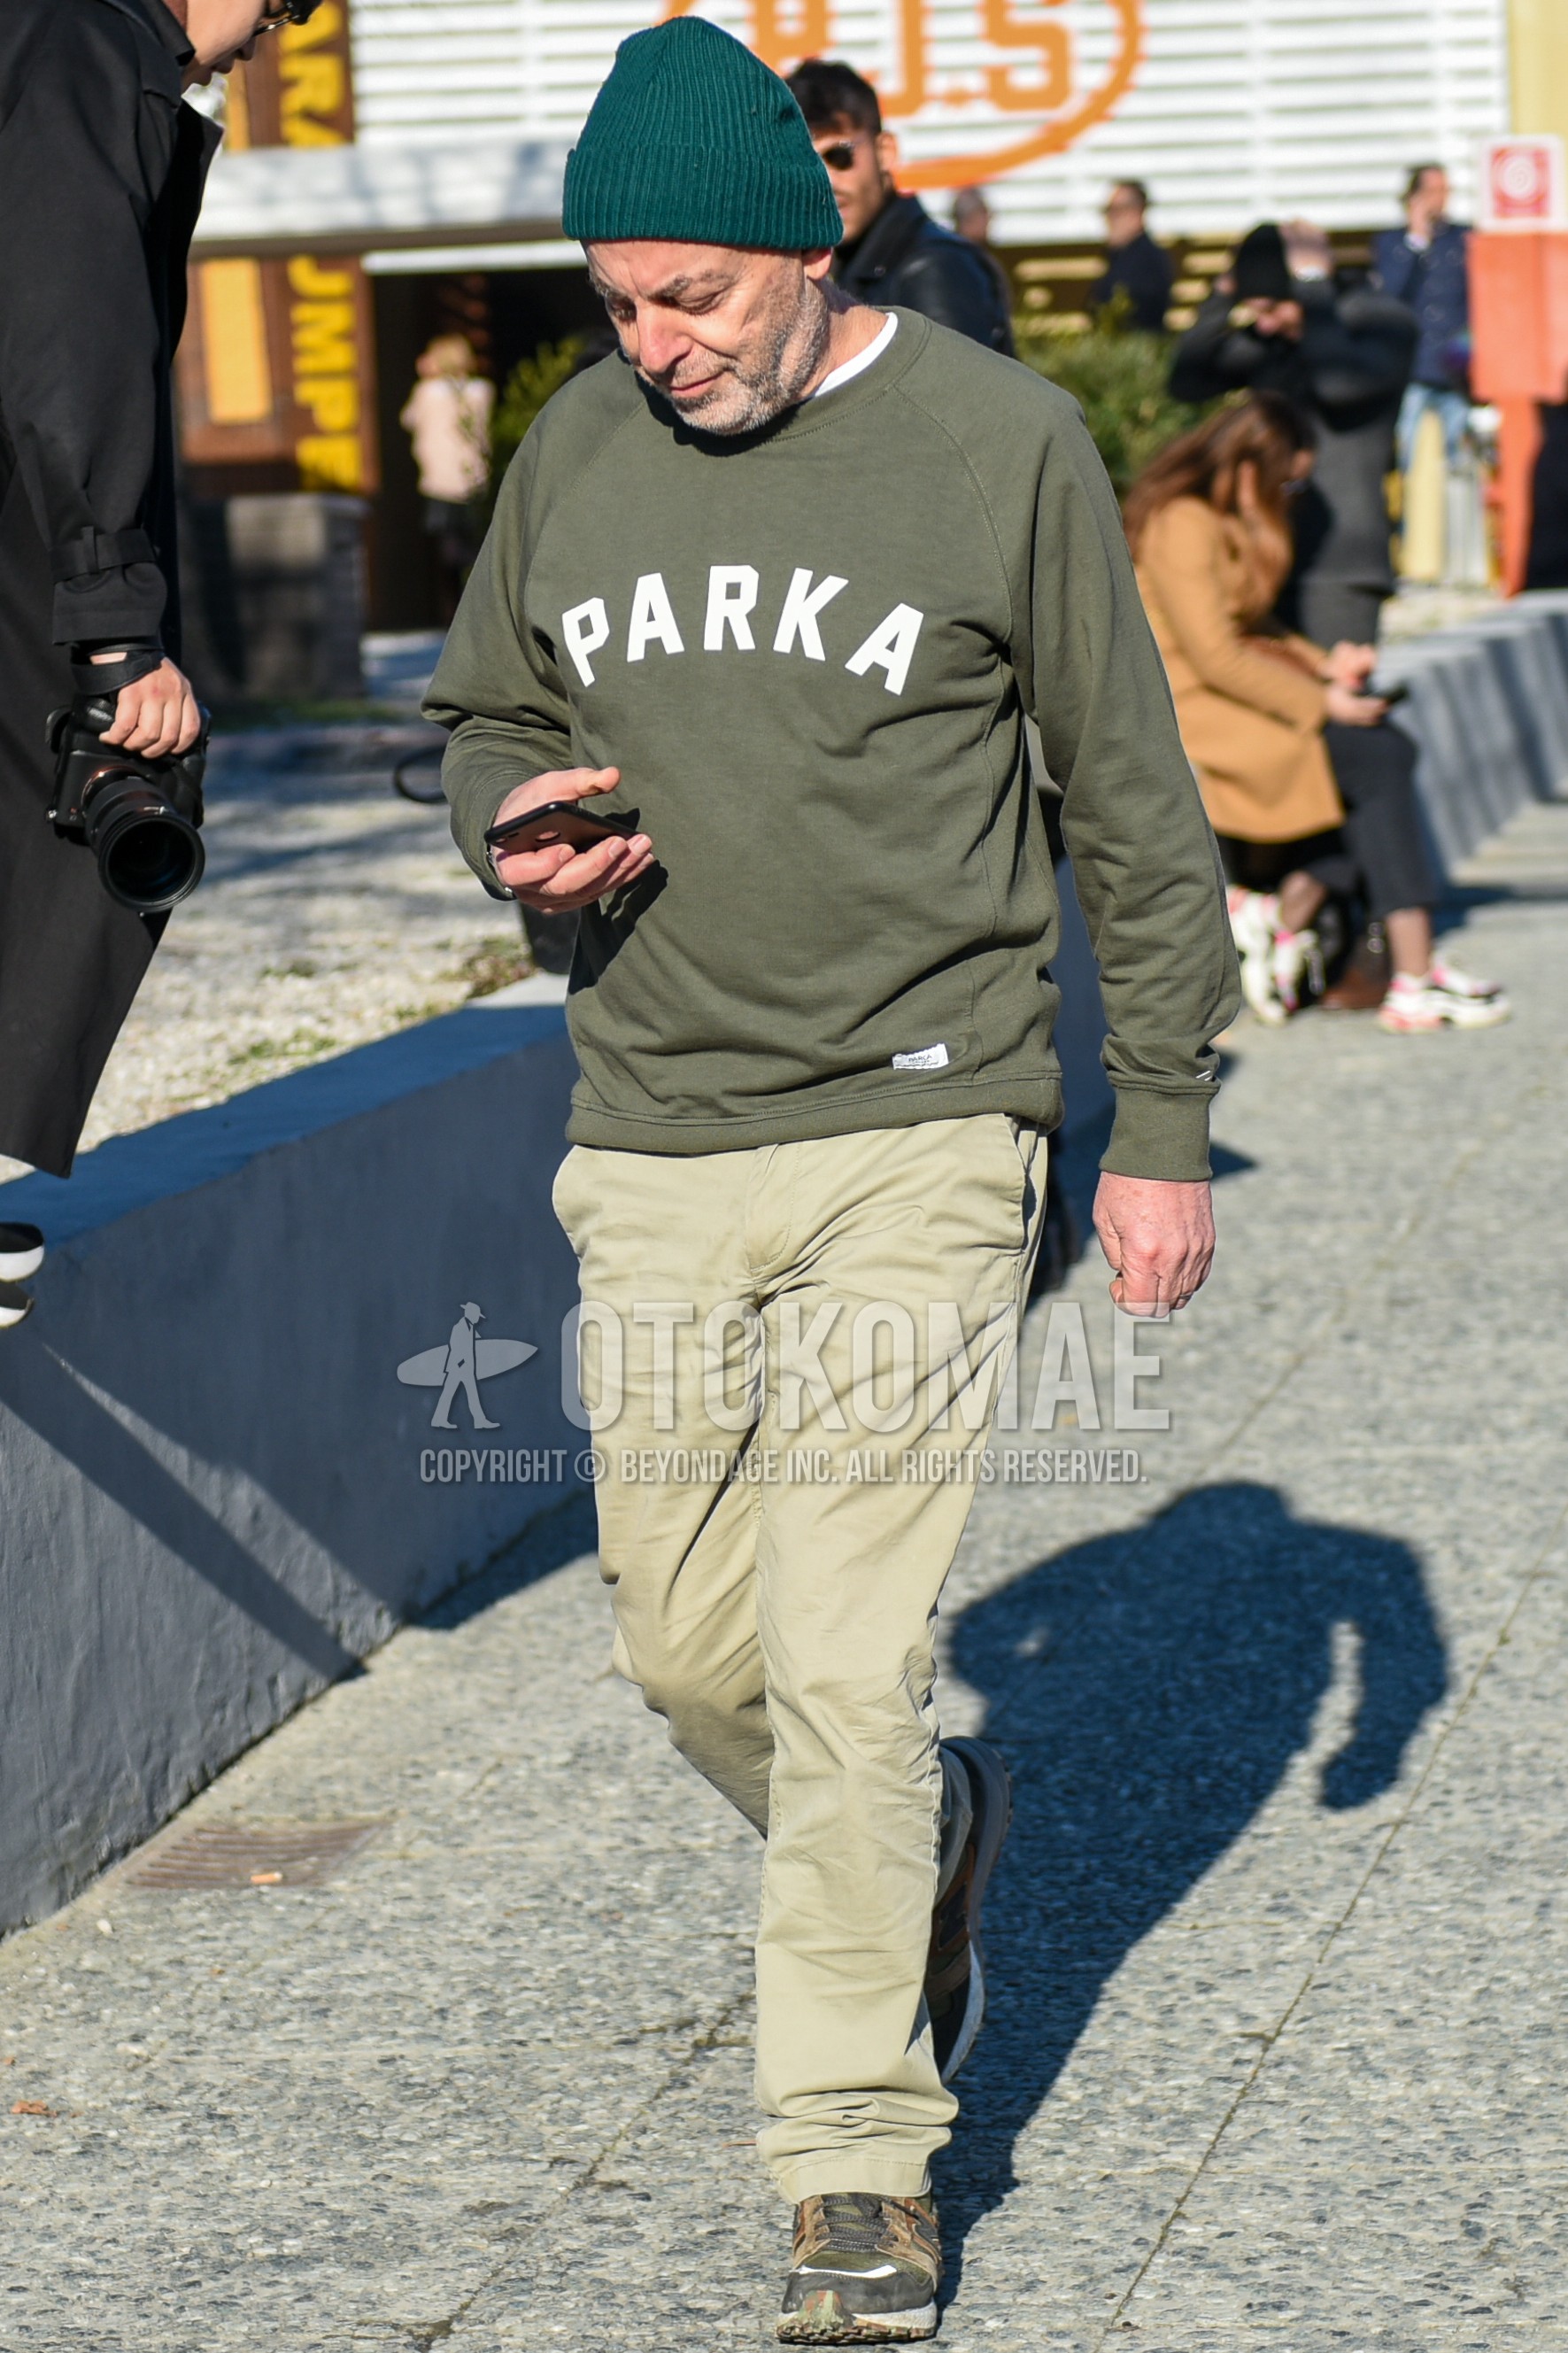 Men's spring autumn outfit with green plain knit cap, olive green deca logo sweatshirt, beige plain chinos, gray low-cut sneakers.